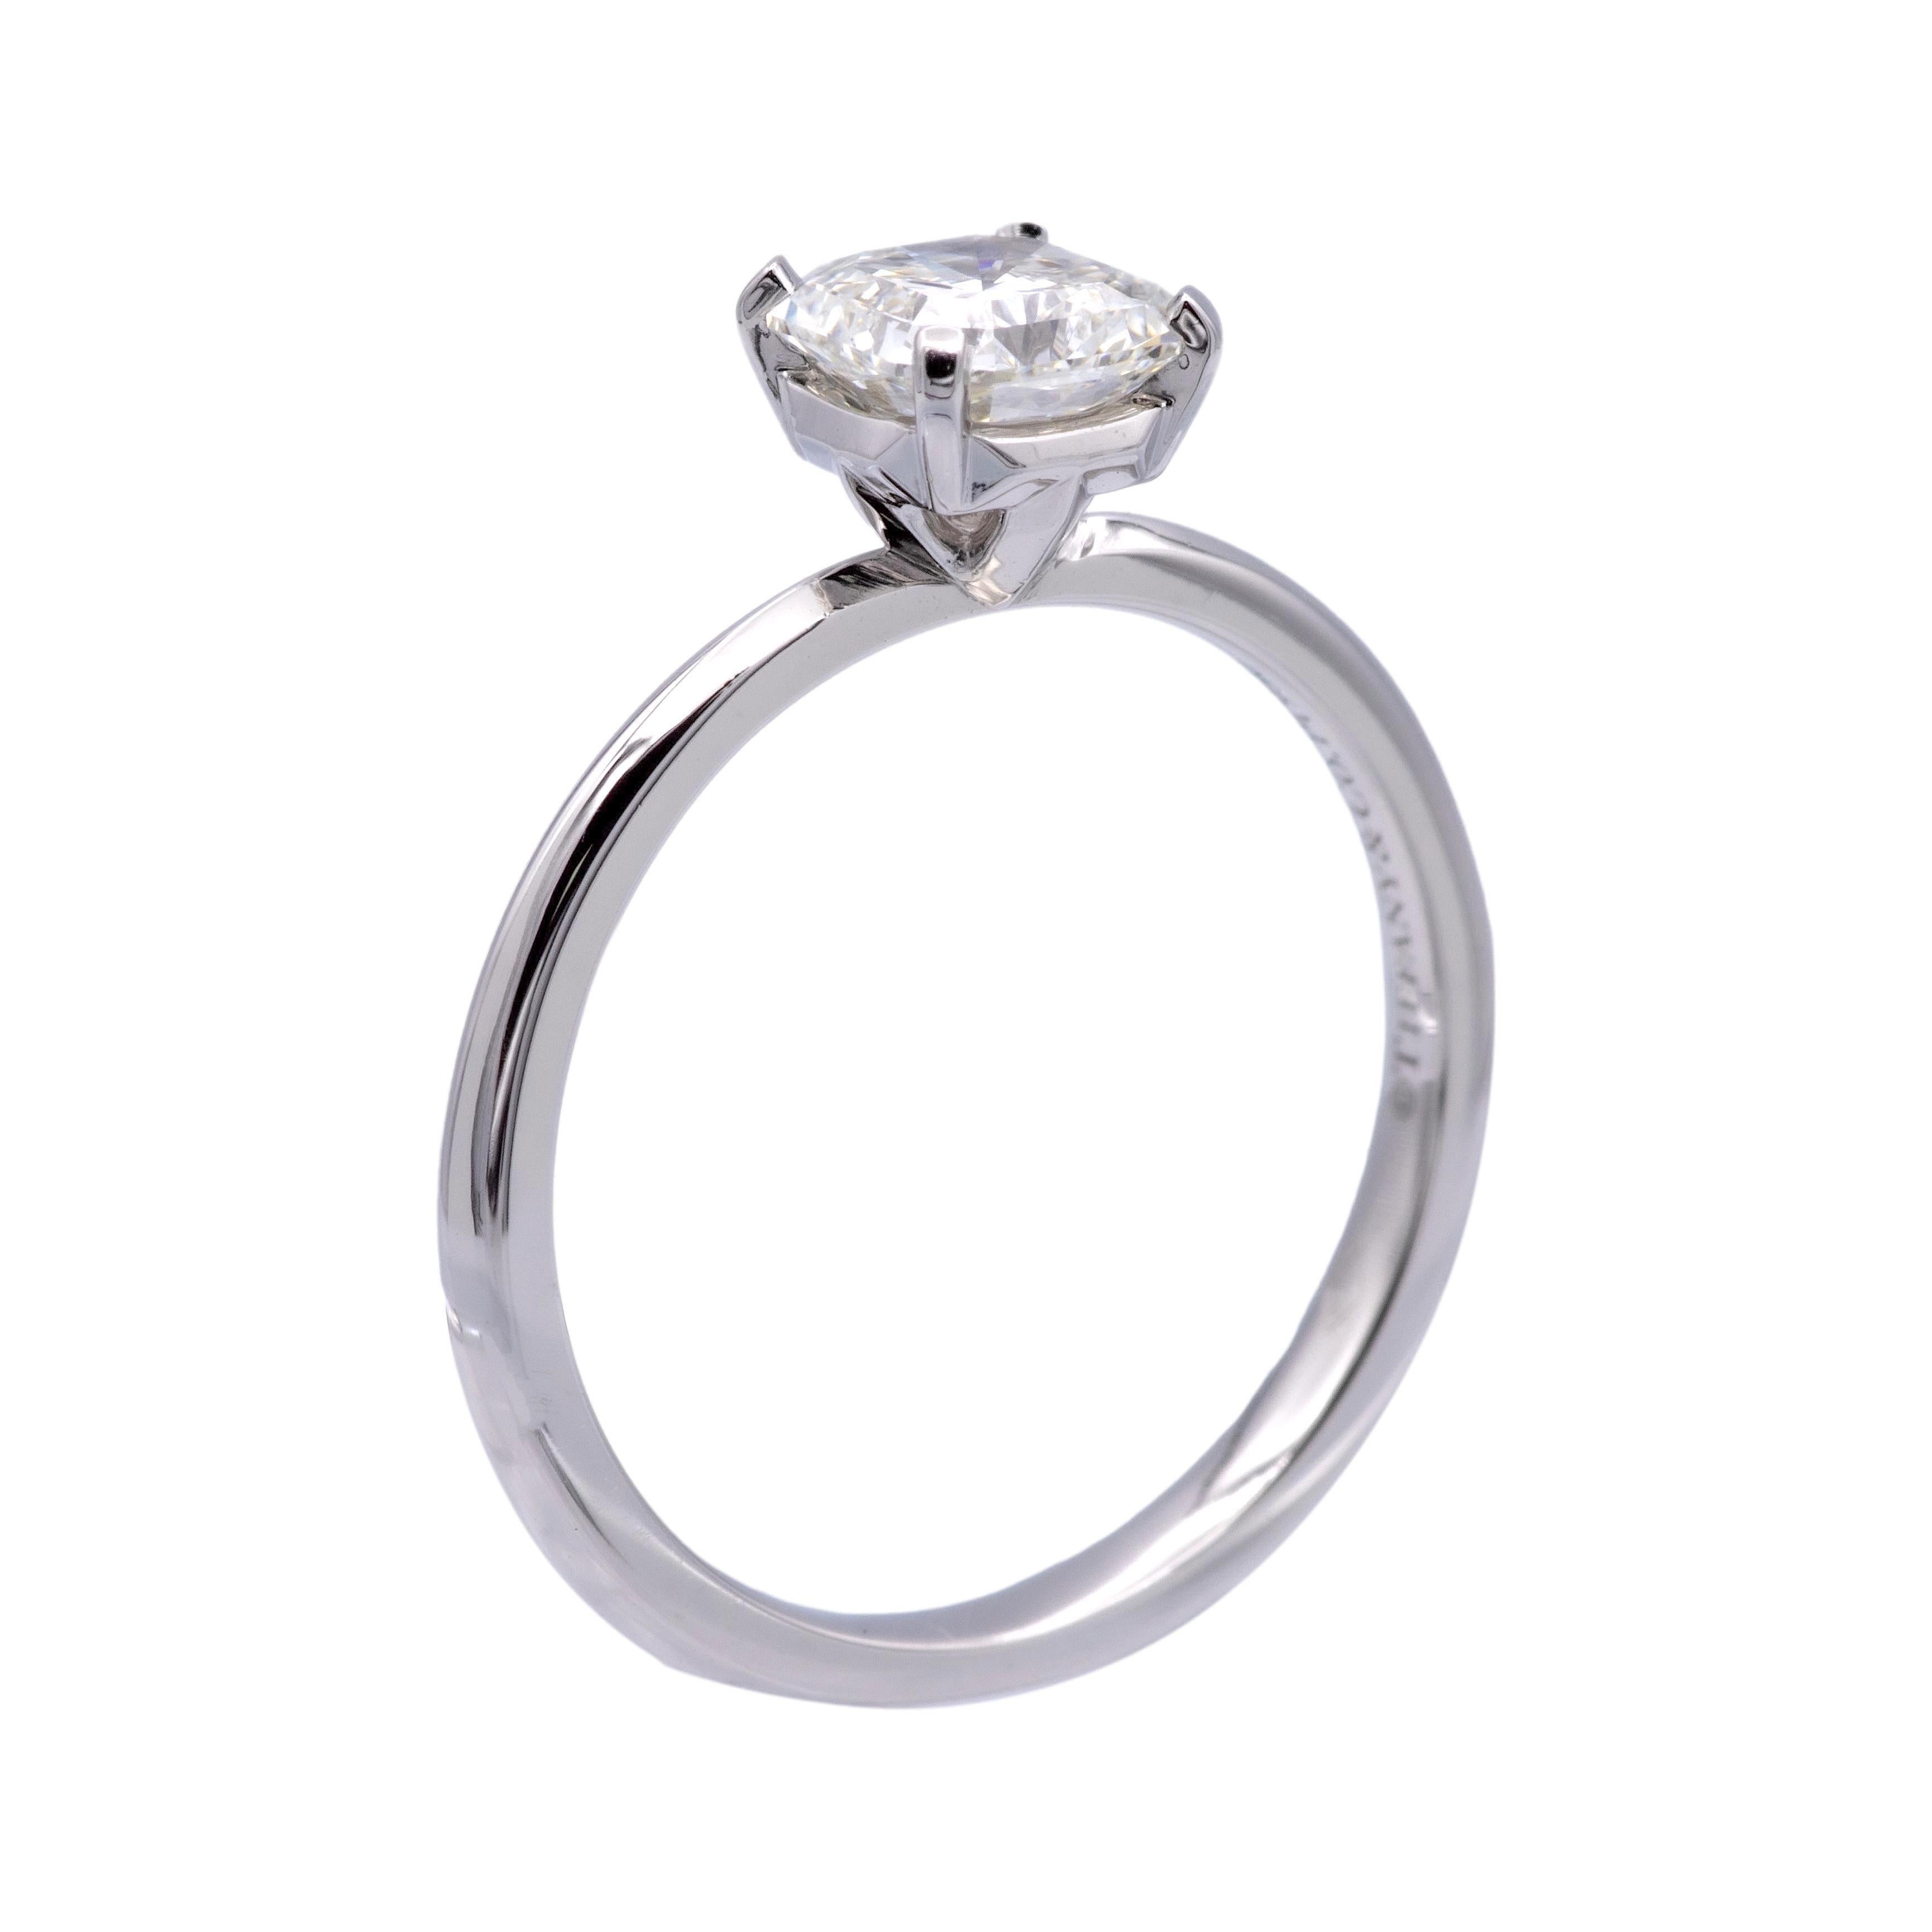 Tiffany & Co. Solitaire Engagement Ring from the True collection finely crafted in platinum featuring Tiffany's signature True cut diamond center weighing .78 carats, I color, VS2 clarity with excellent cut , polish and symmetry set in a 4 prong